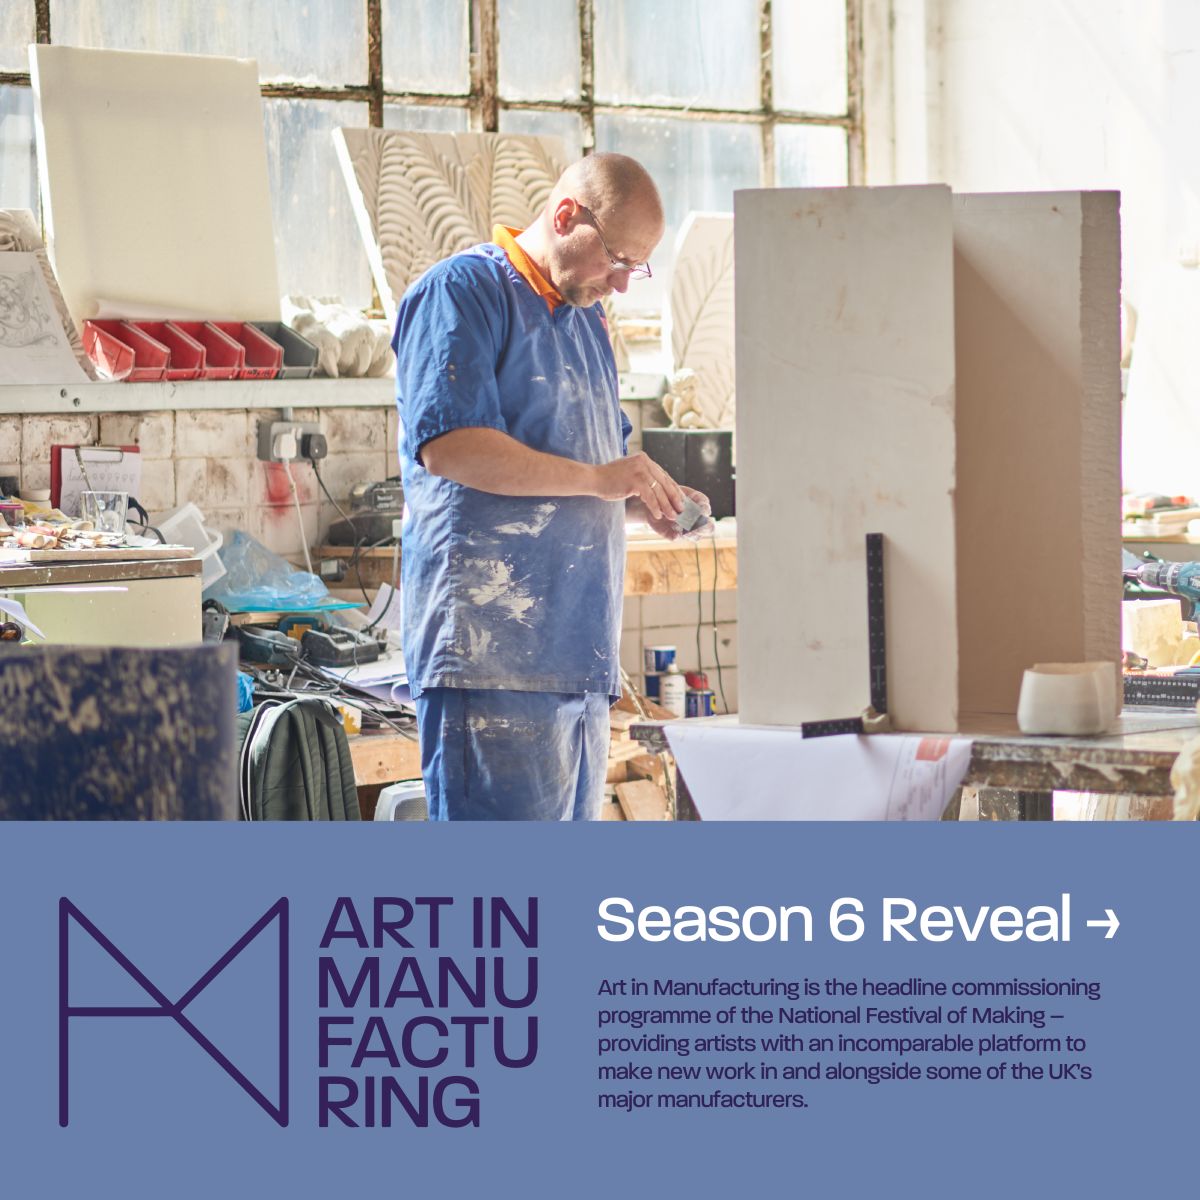 National Festival of Making reveals artist lineup for Season 6 of Art in Manufacturing. 